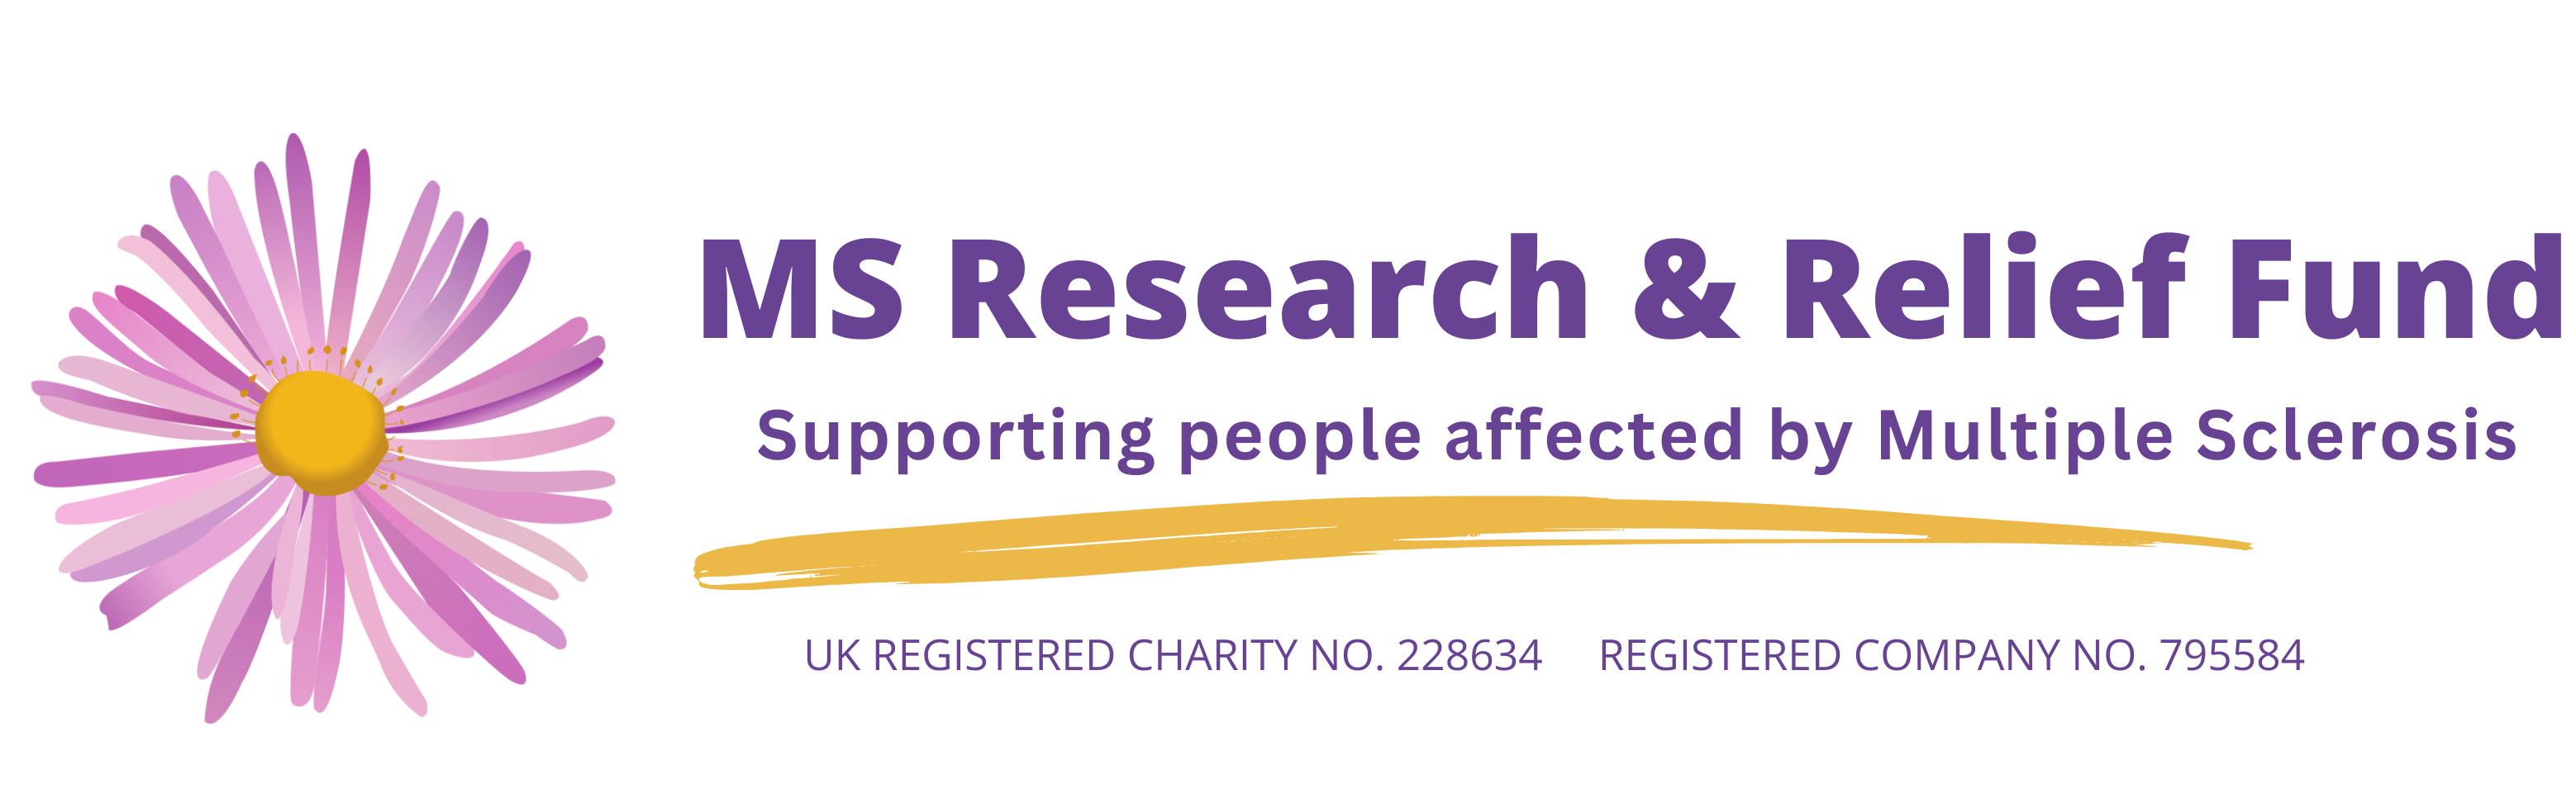 MS Research and Relief Fund